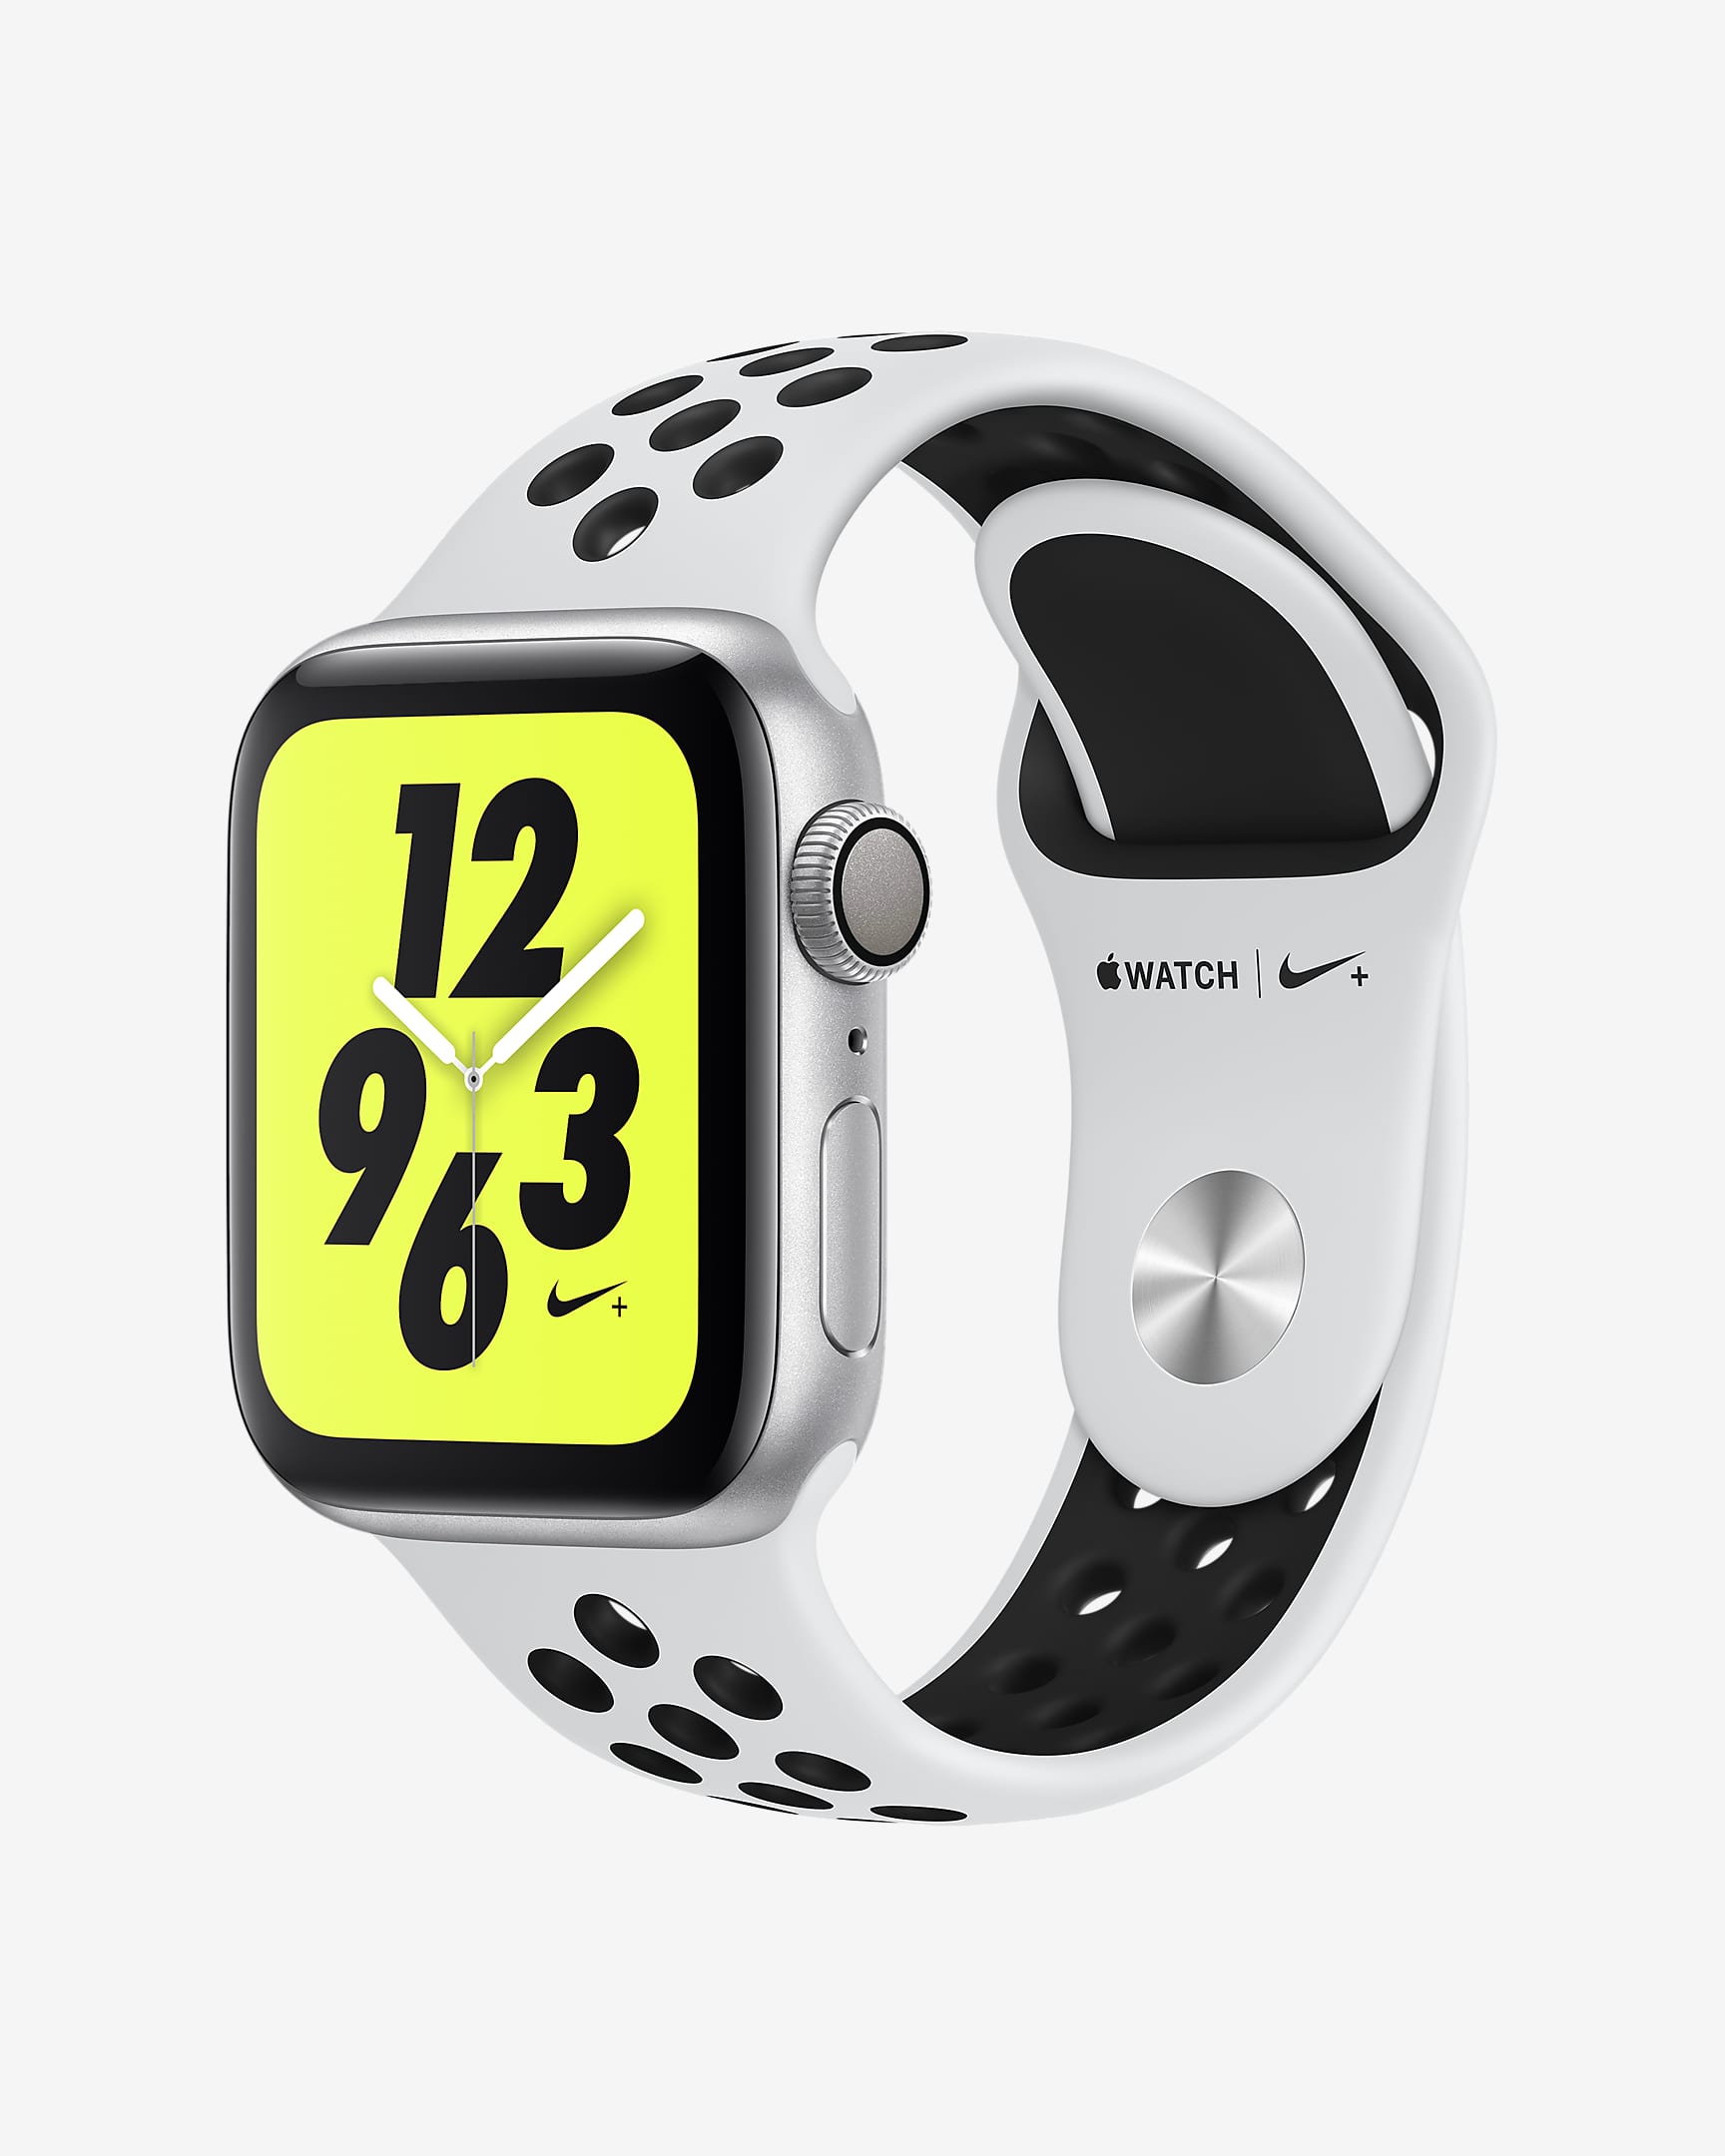 Apple Watch Nike+ Series 4 (GPS) with Nike Sport Band Open Box 40mm ...